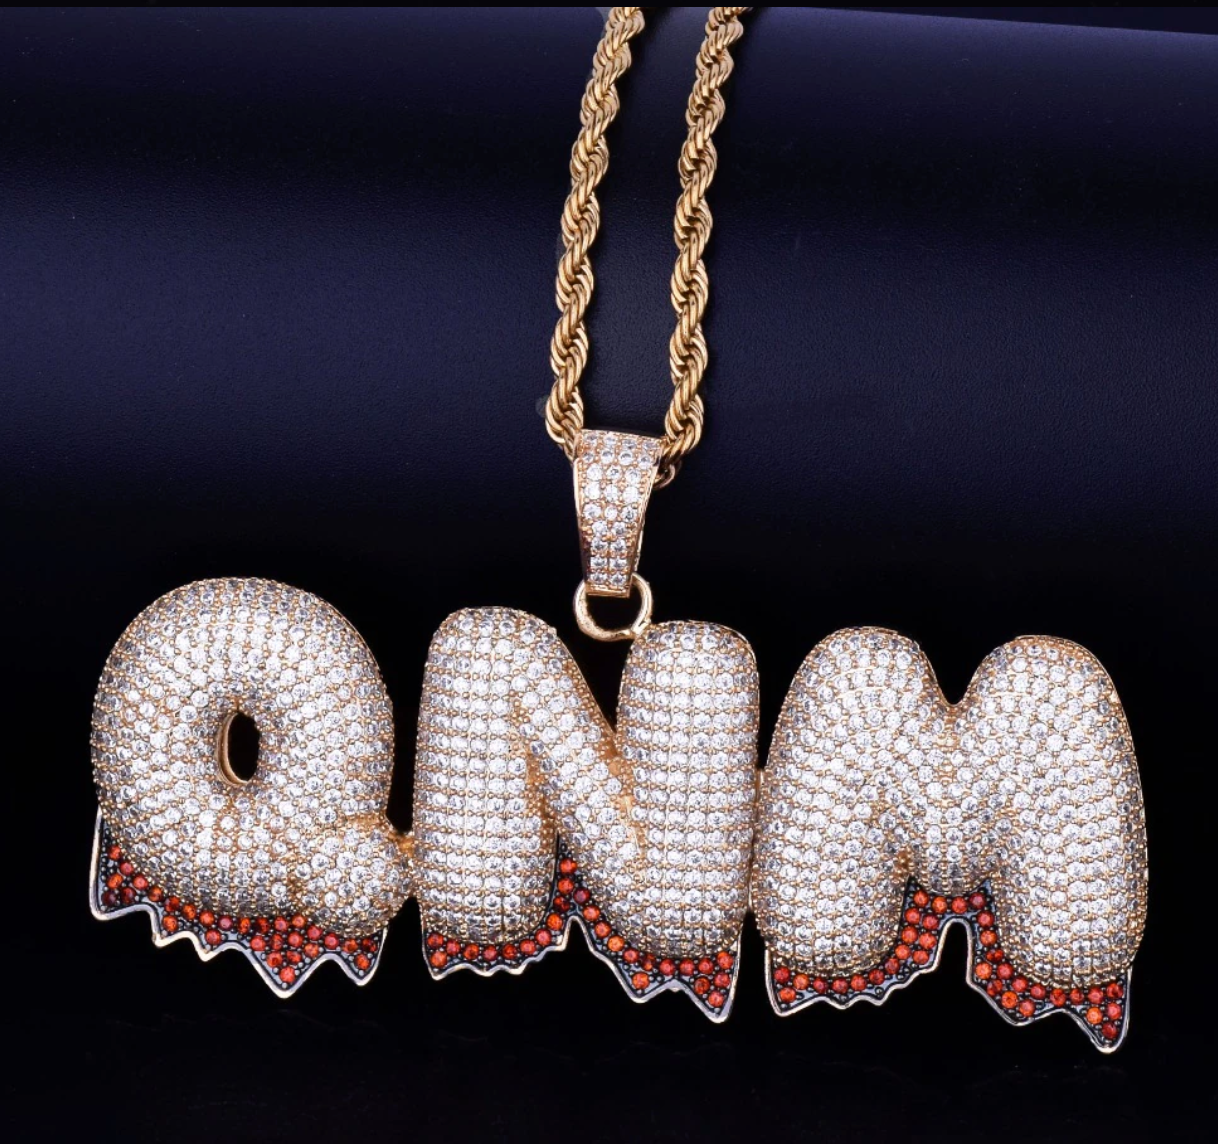 Custom Red Drip Bubble Letter Necklace Name Pendant Chain Gold Silver Diamond Hip Hop Jewelry #24